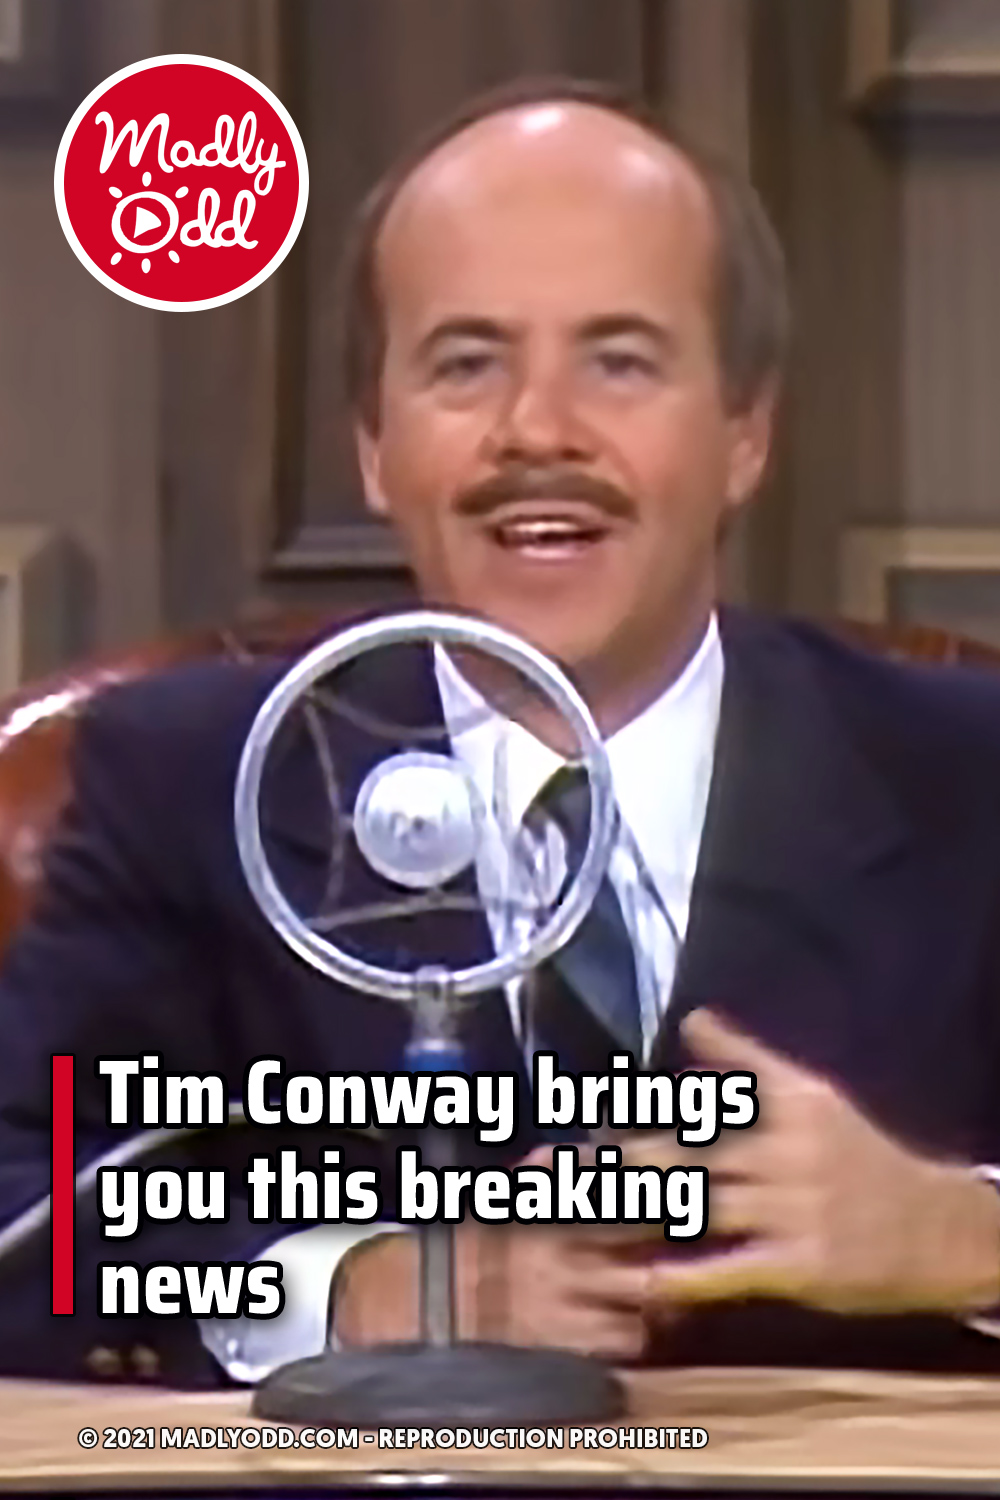 Tim Conway brings you this breaking news